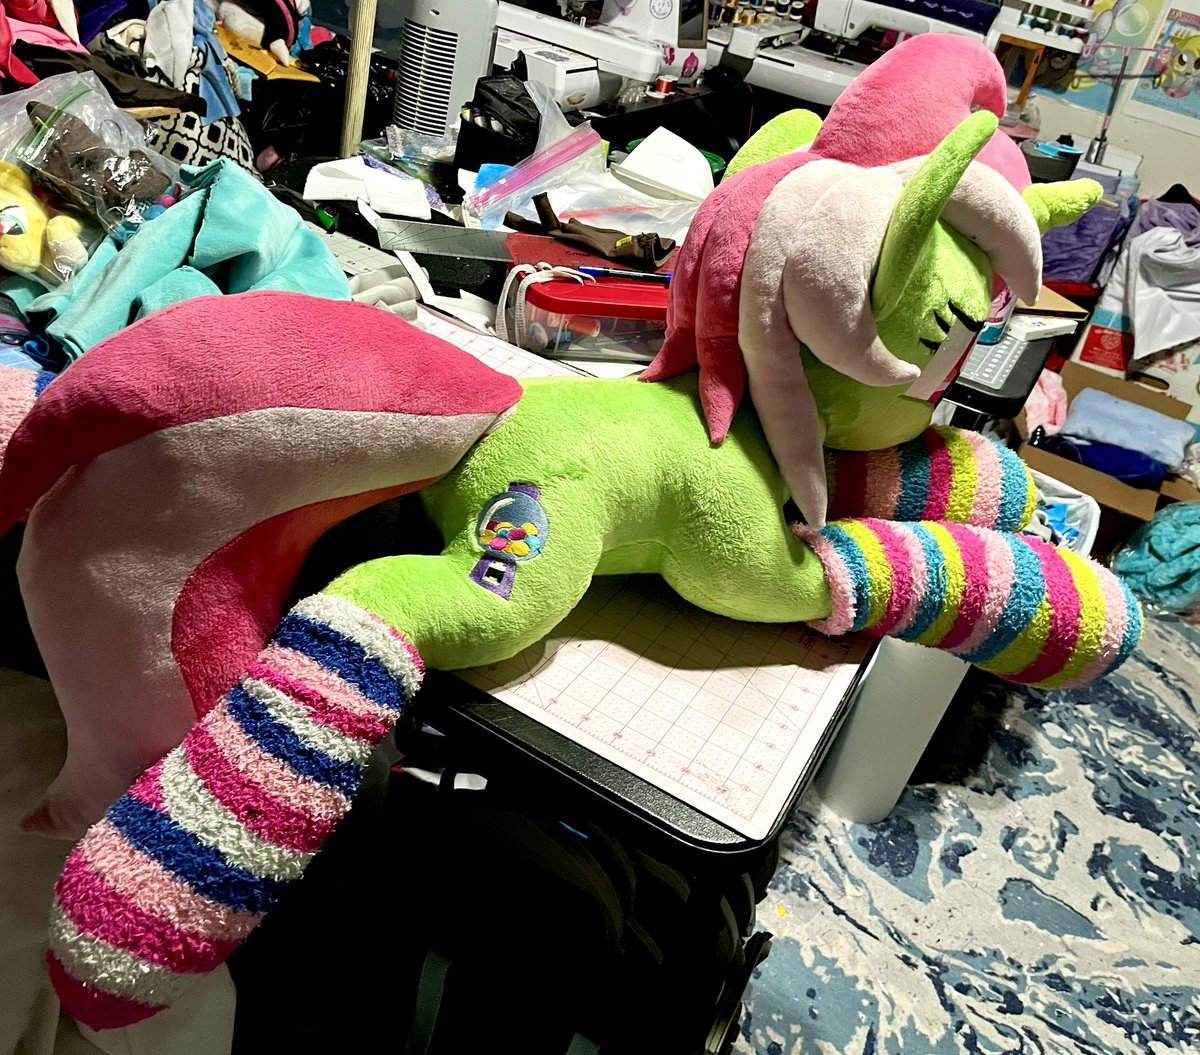 Asking $450 plus free US shipping I purchased this “Lifesize” plushie of Bubblegum Minty from LanaCraft back in late 2016 as a commission. She’s mostly just been sitting around since I purchased her and I’d like to find her a new forever home with somepony who